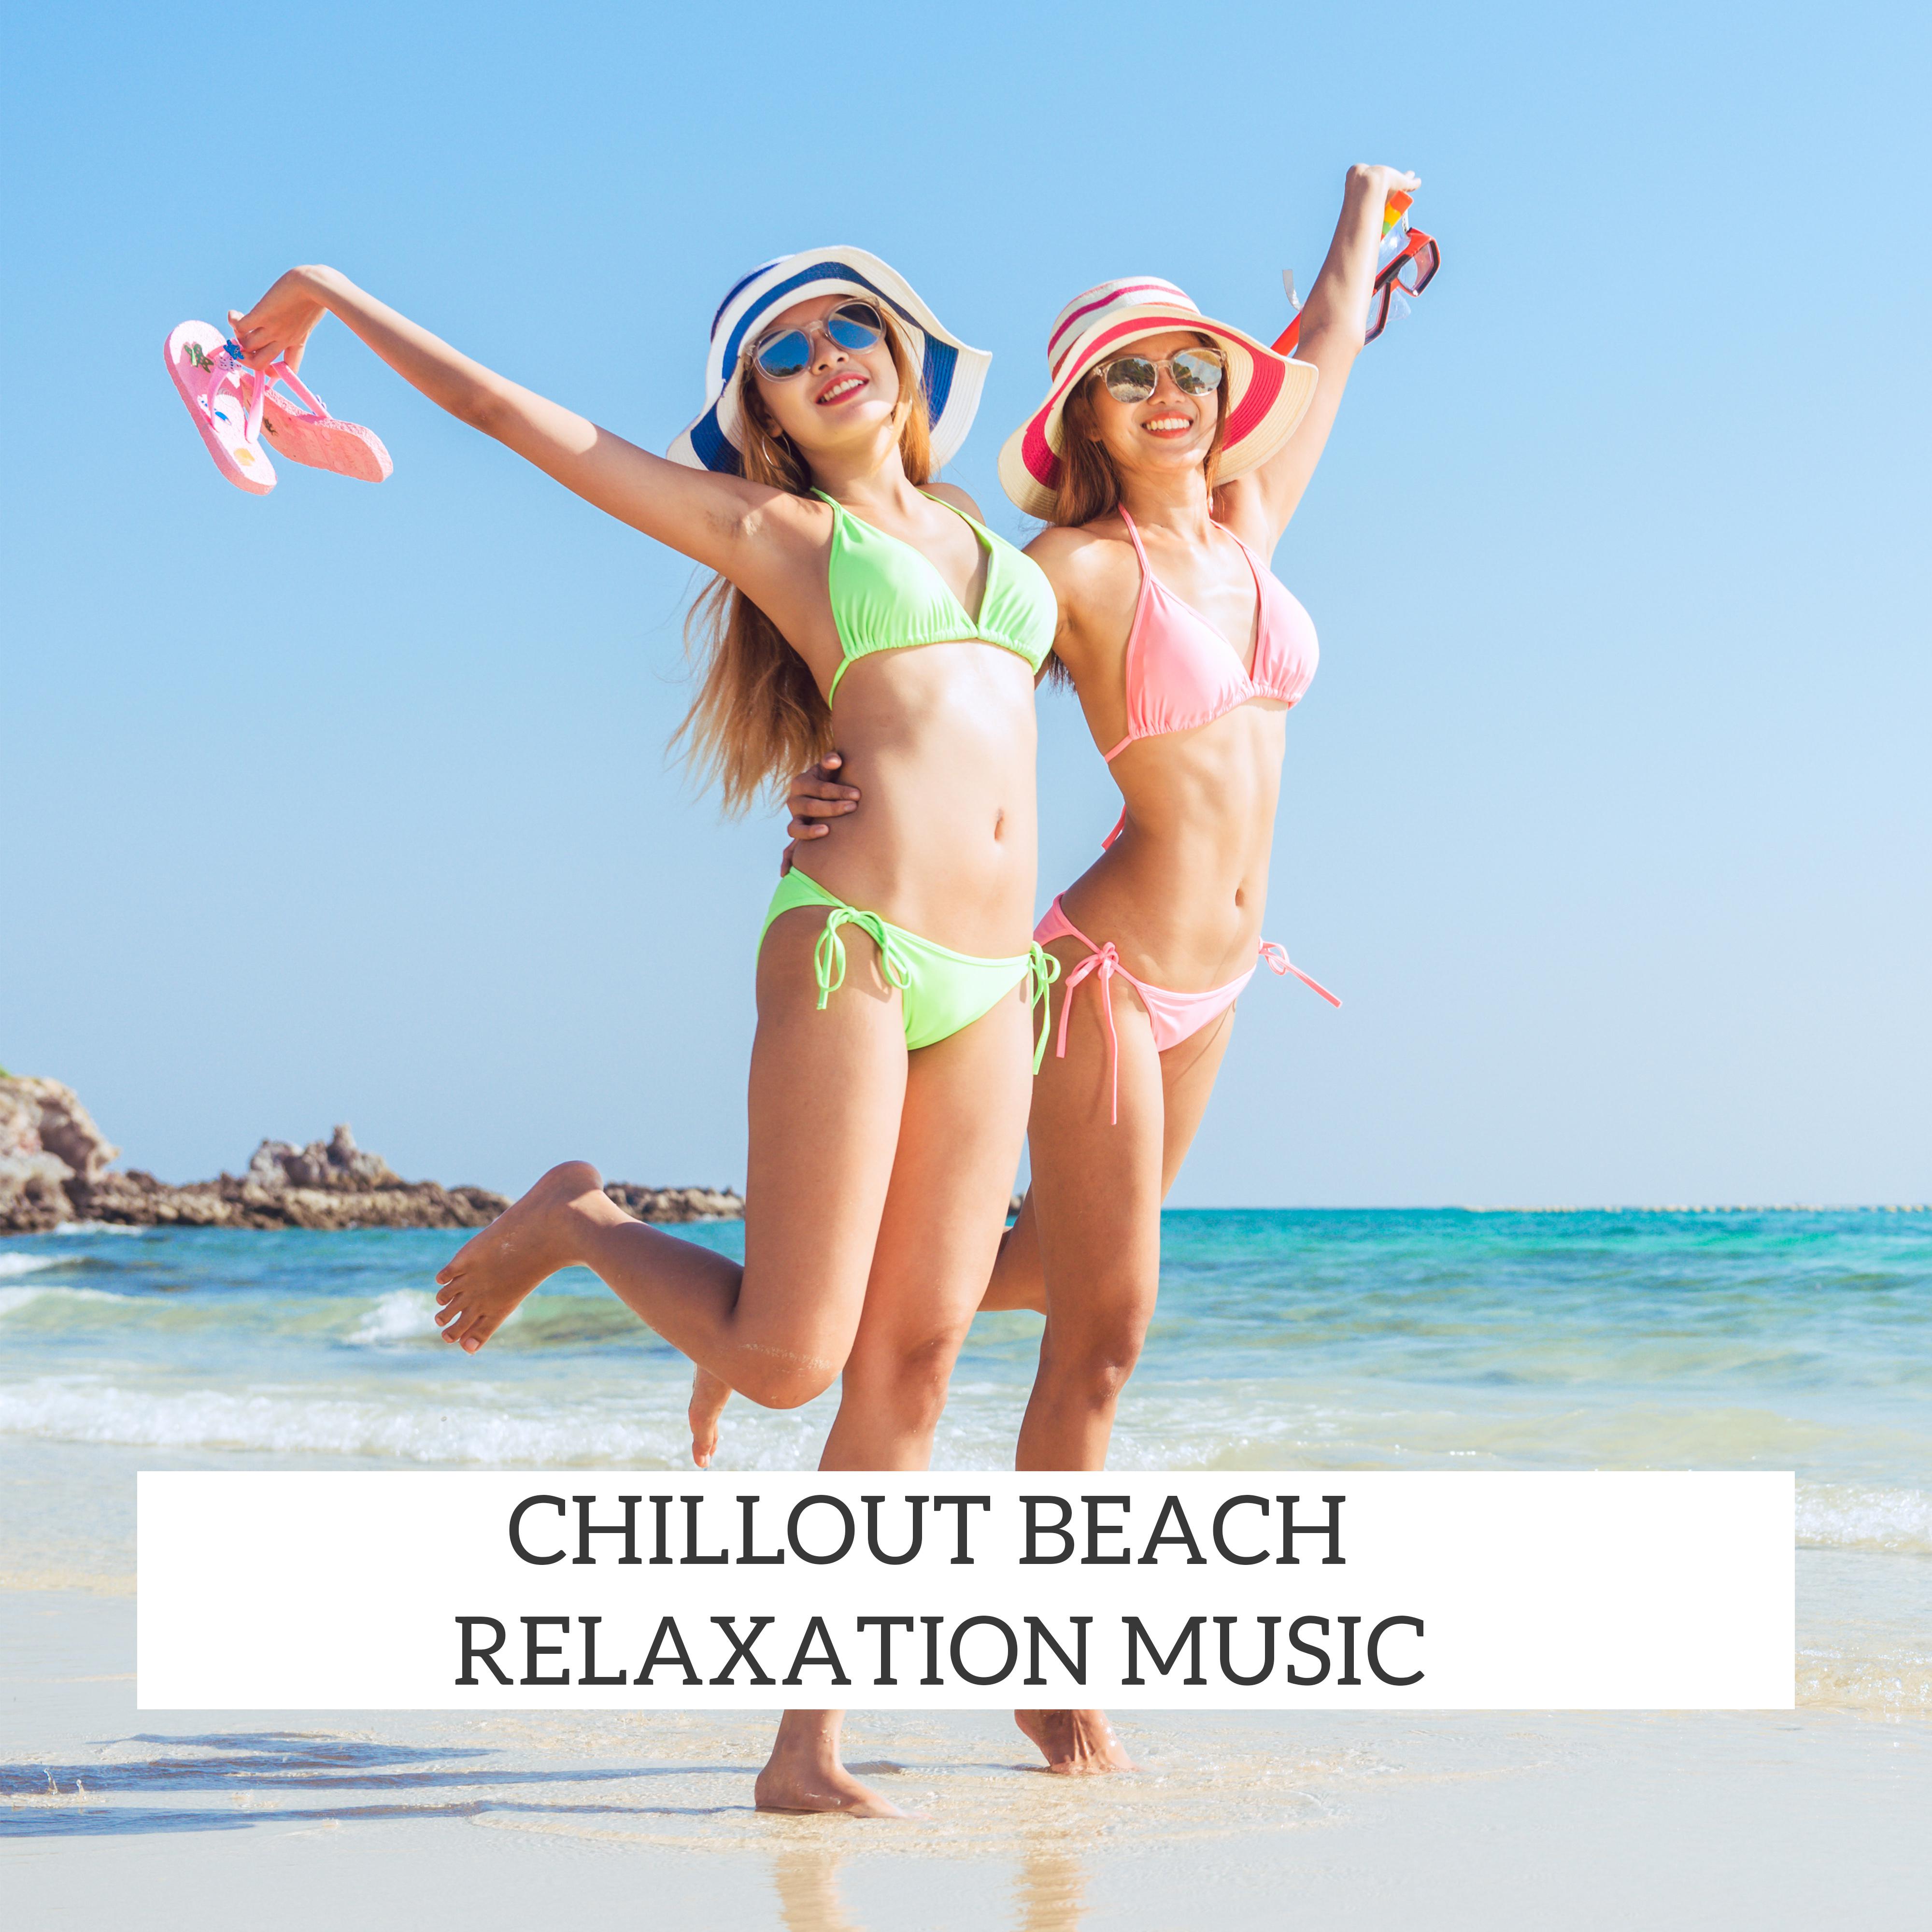 Chillout Beach Relaxation Music